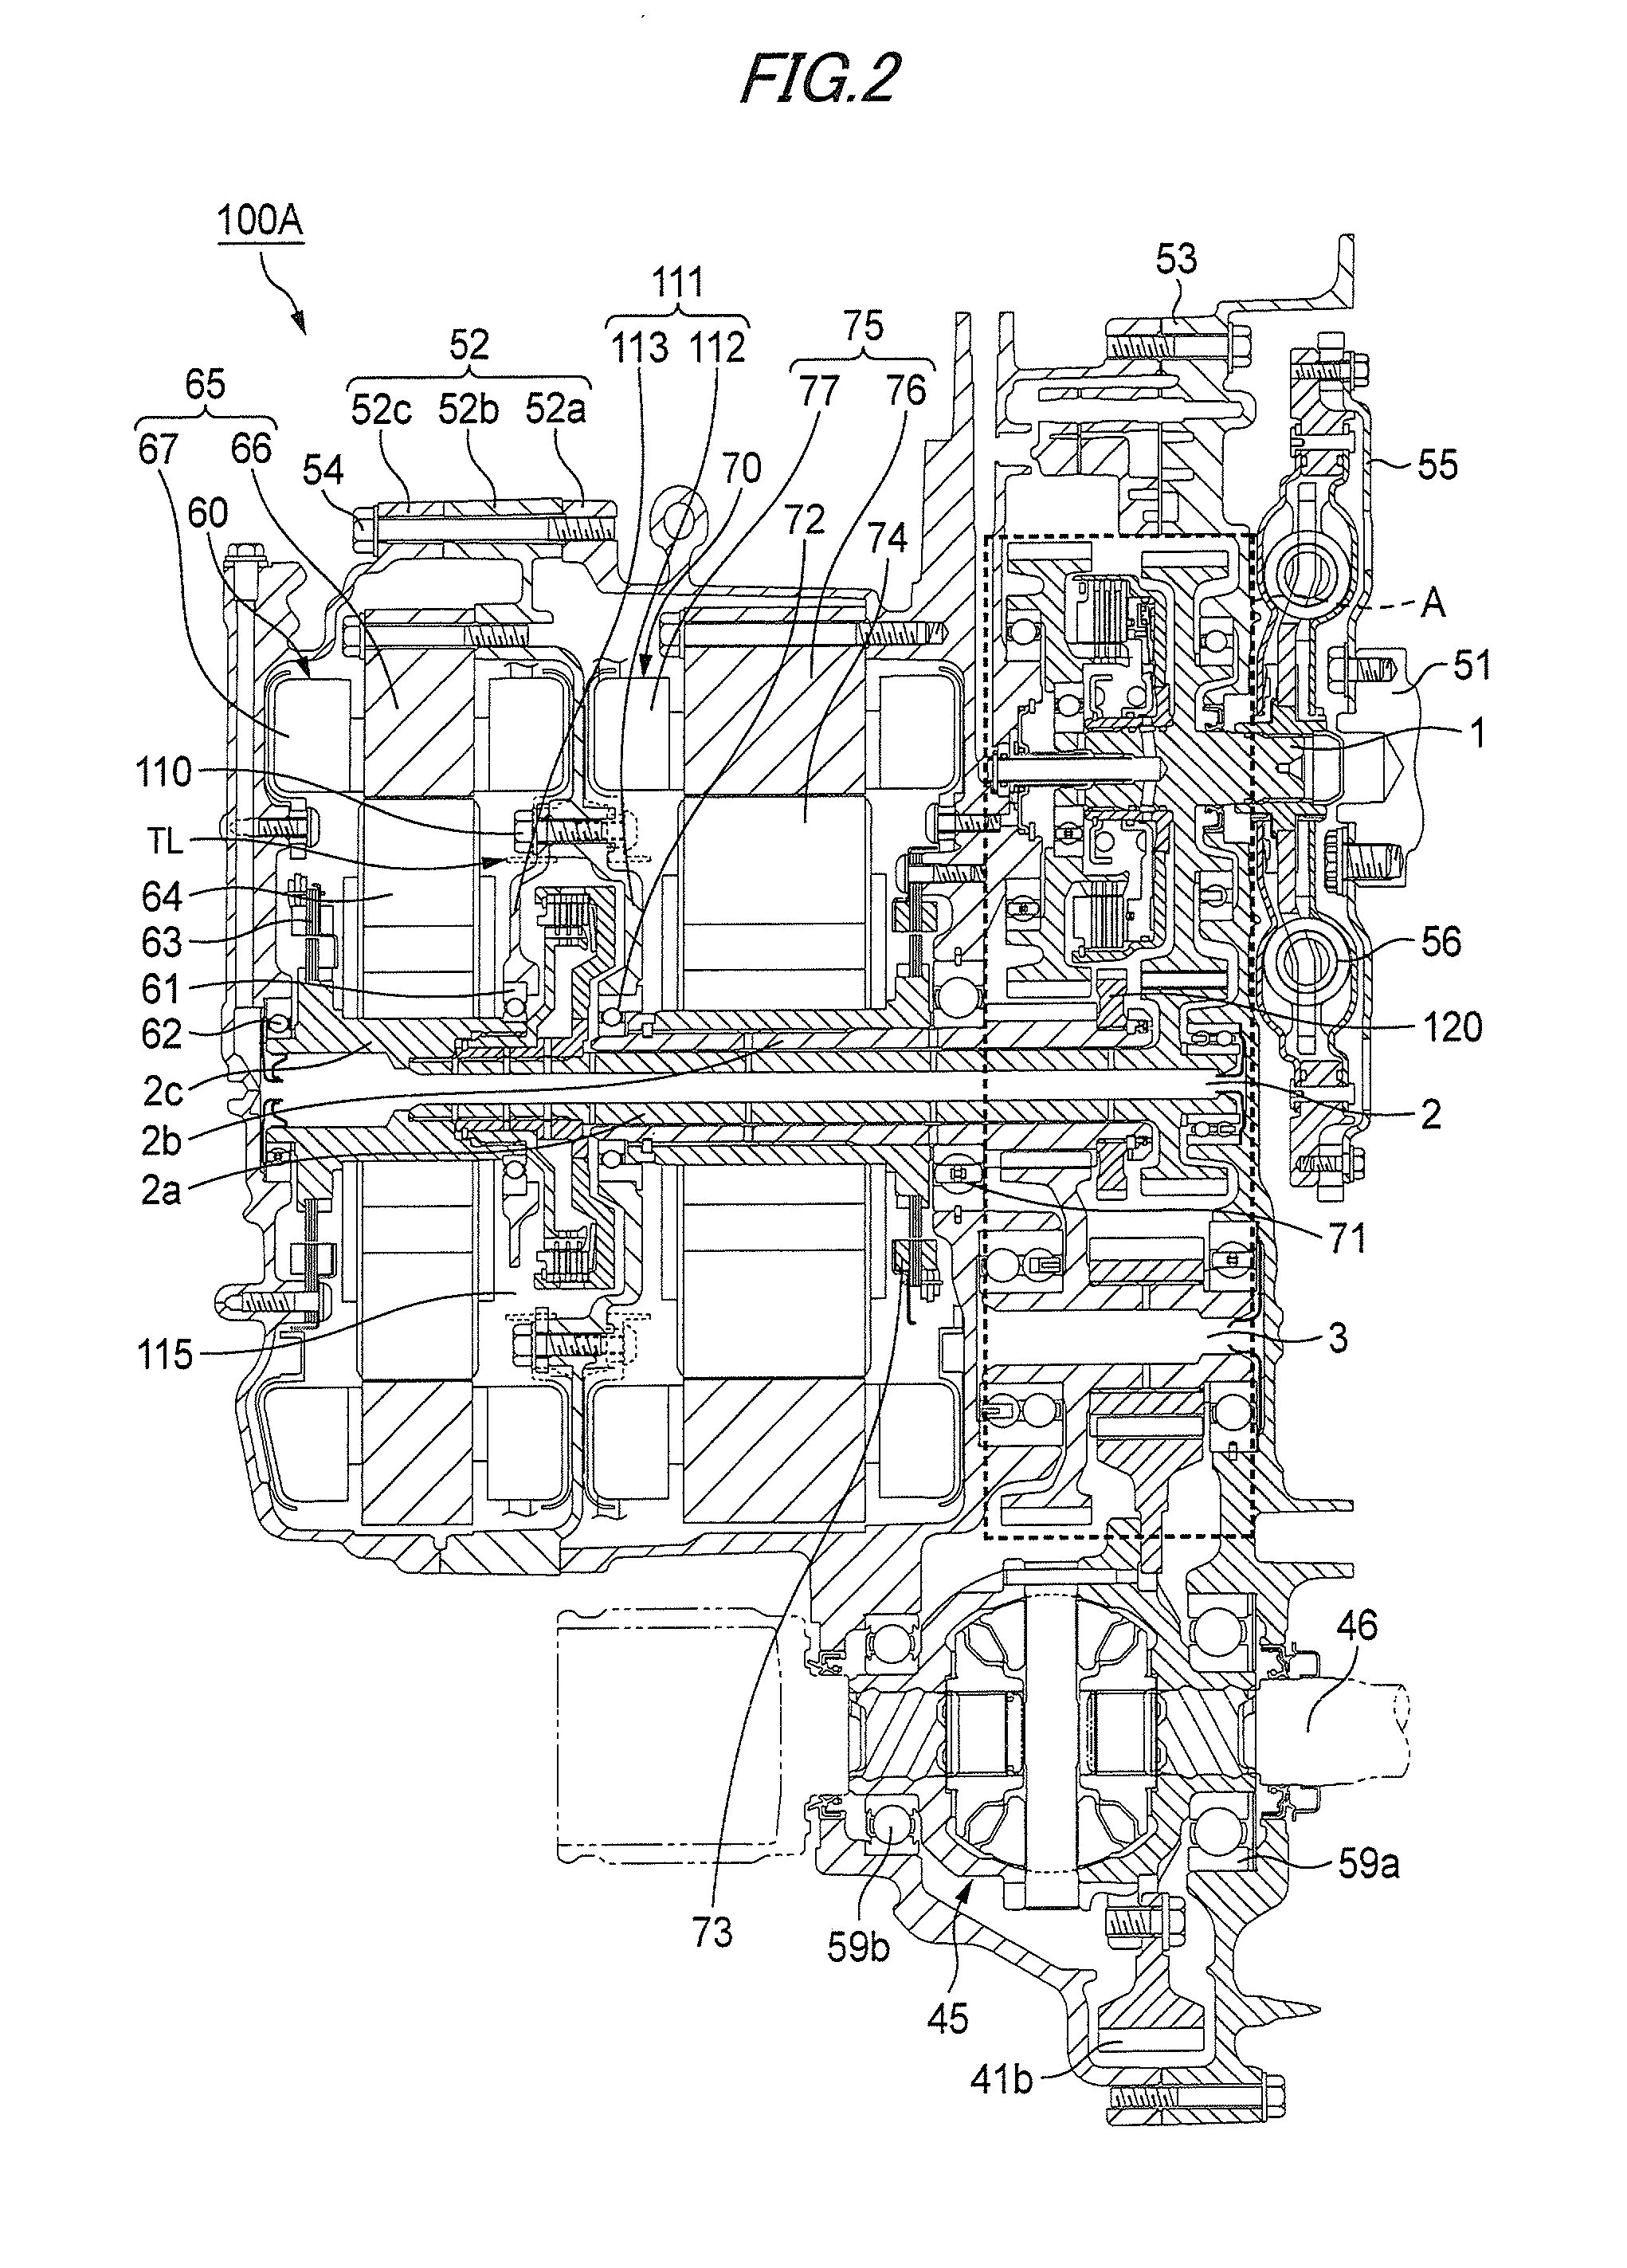 Drive apparatus for hybrid vehicle